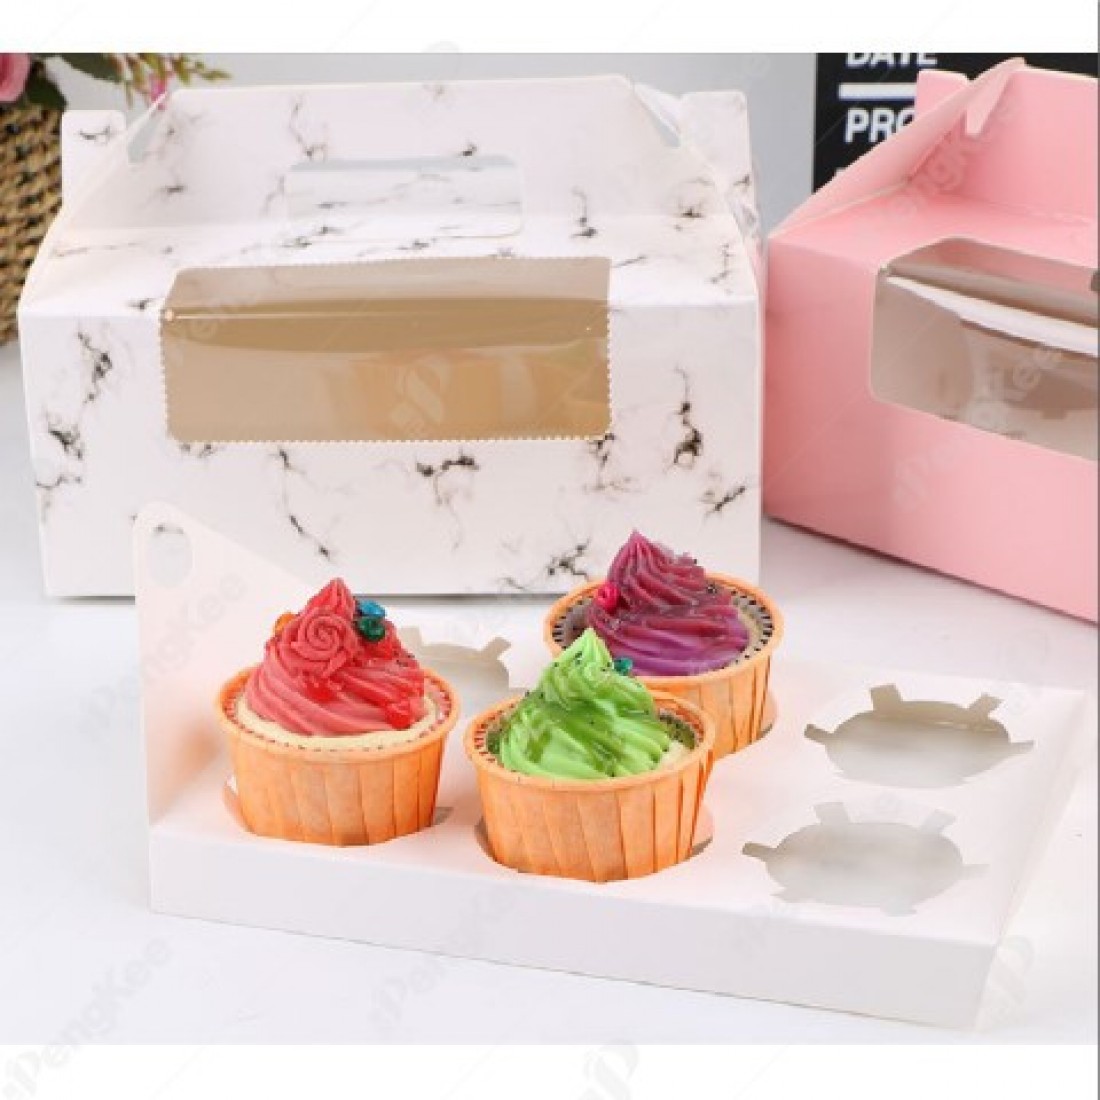 PAPER MUFFIN CAKE BOX WITH WINDOW AND HANDLE 6 CAVITY (15(W)*23.6(L)*9(H)CM)